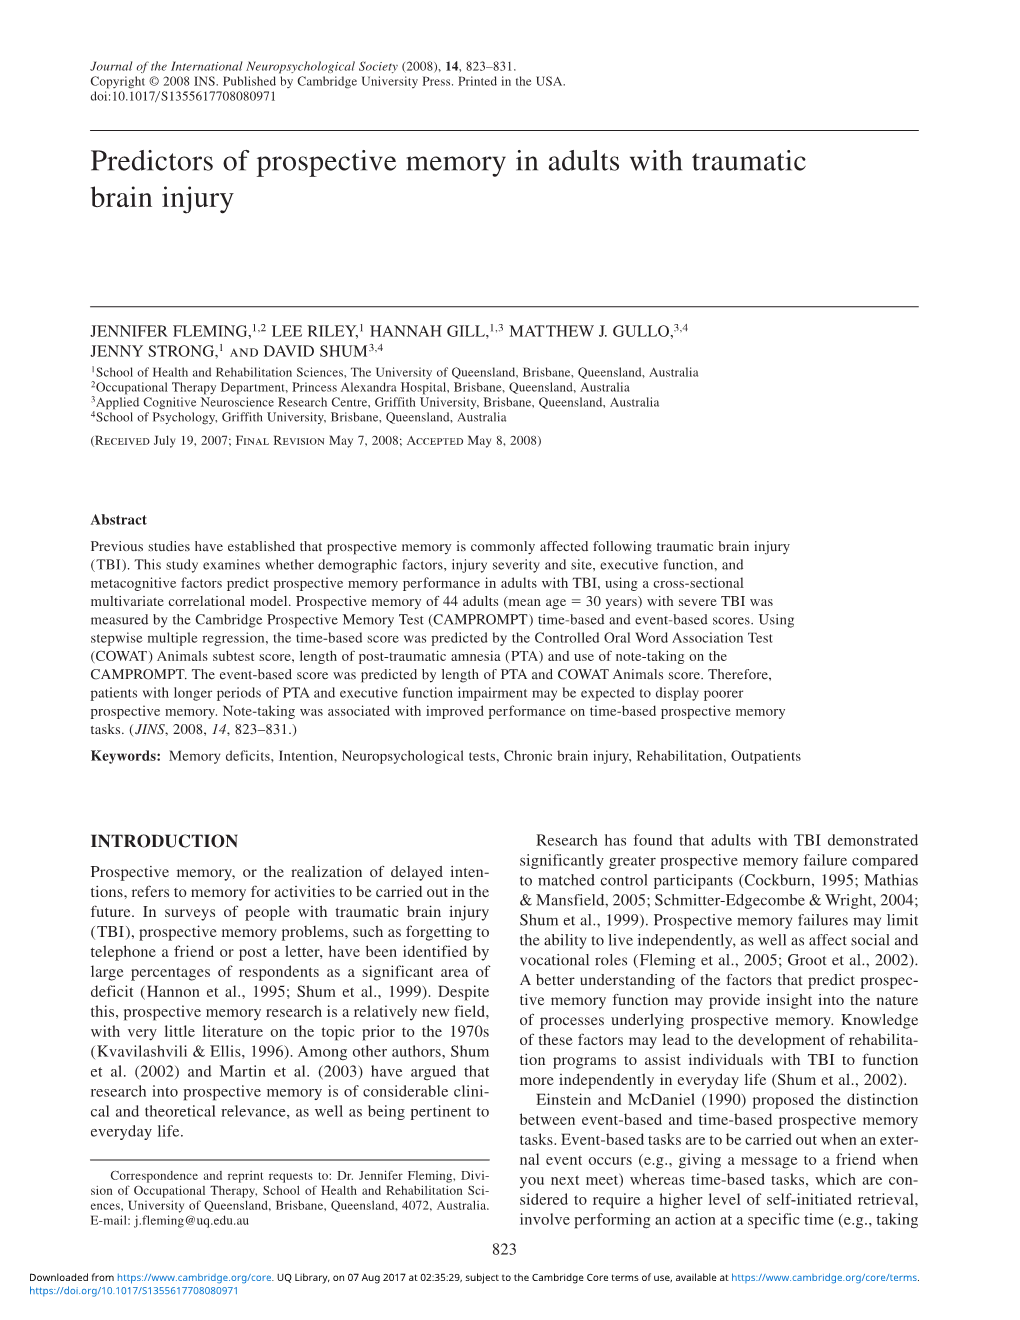 Predictors of Prospective Memory in Adults with Traumatic Brain Injury